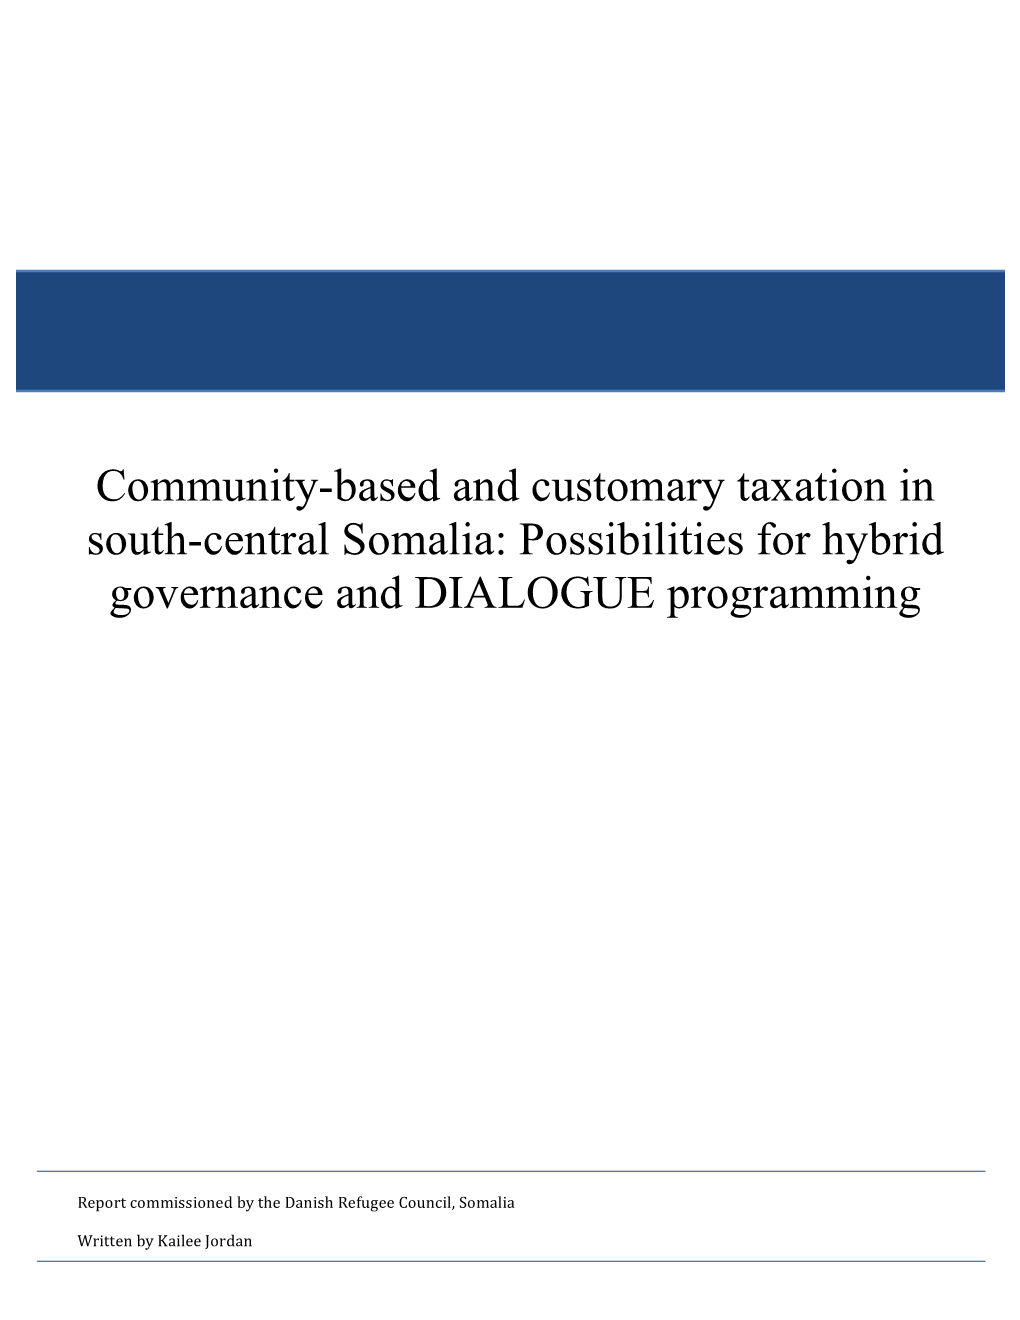 Community-Based and Customary Taxation in South-Central Somalia: Possibilities for Hybrid Governance and DIALOGUE Programming !